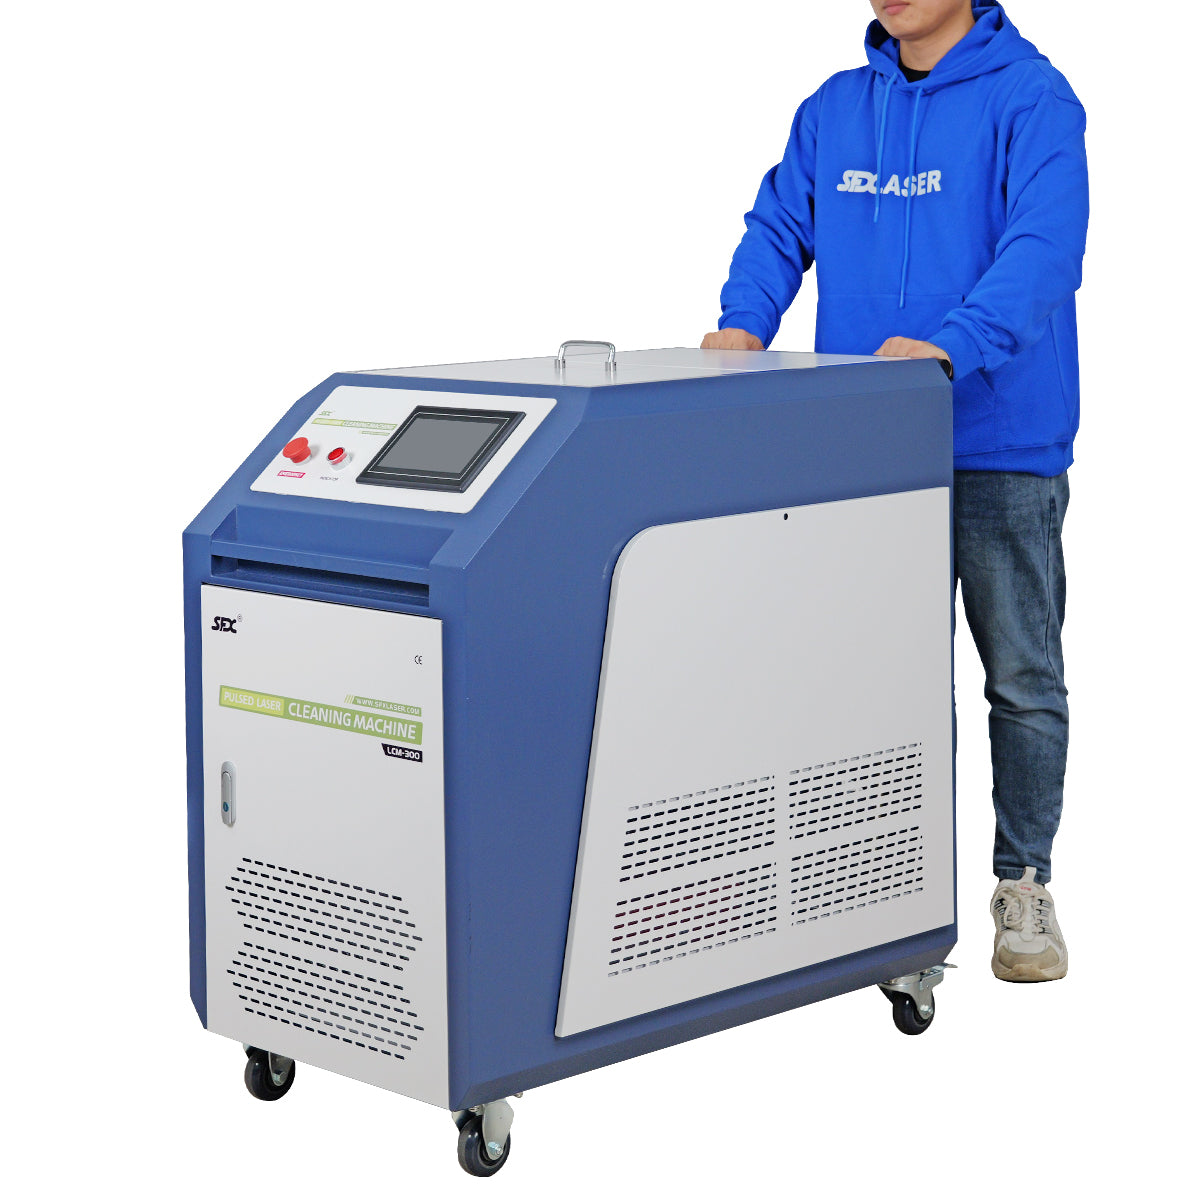 ZAC 1500W Continuous Laser Cleaning Machine 220V 1-Phase MAX Hand